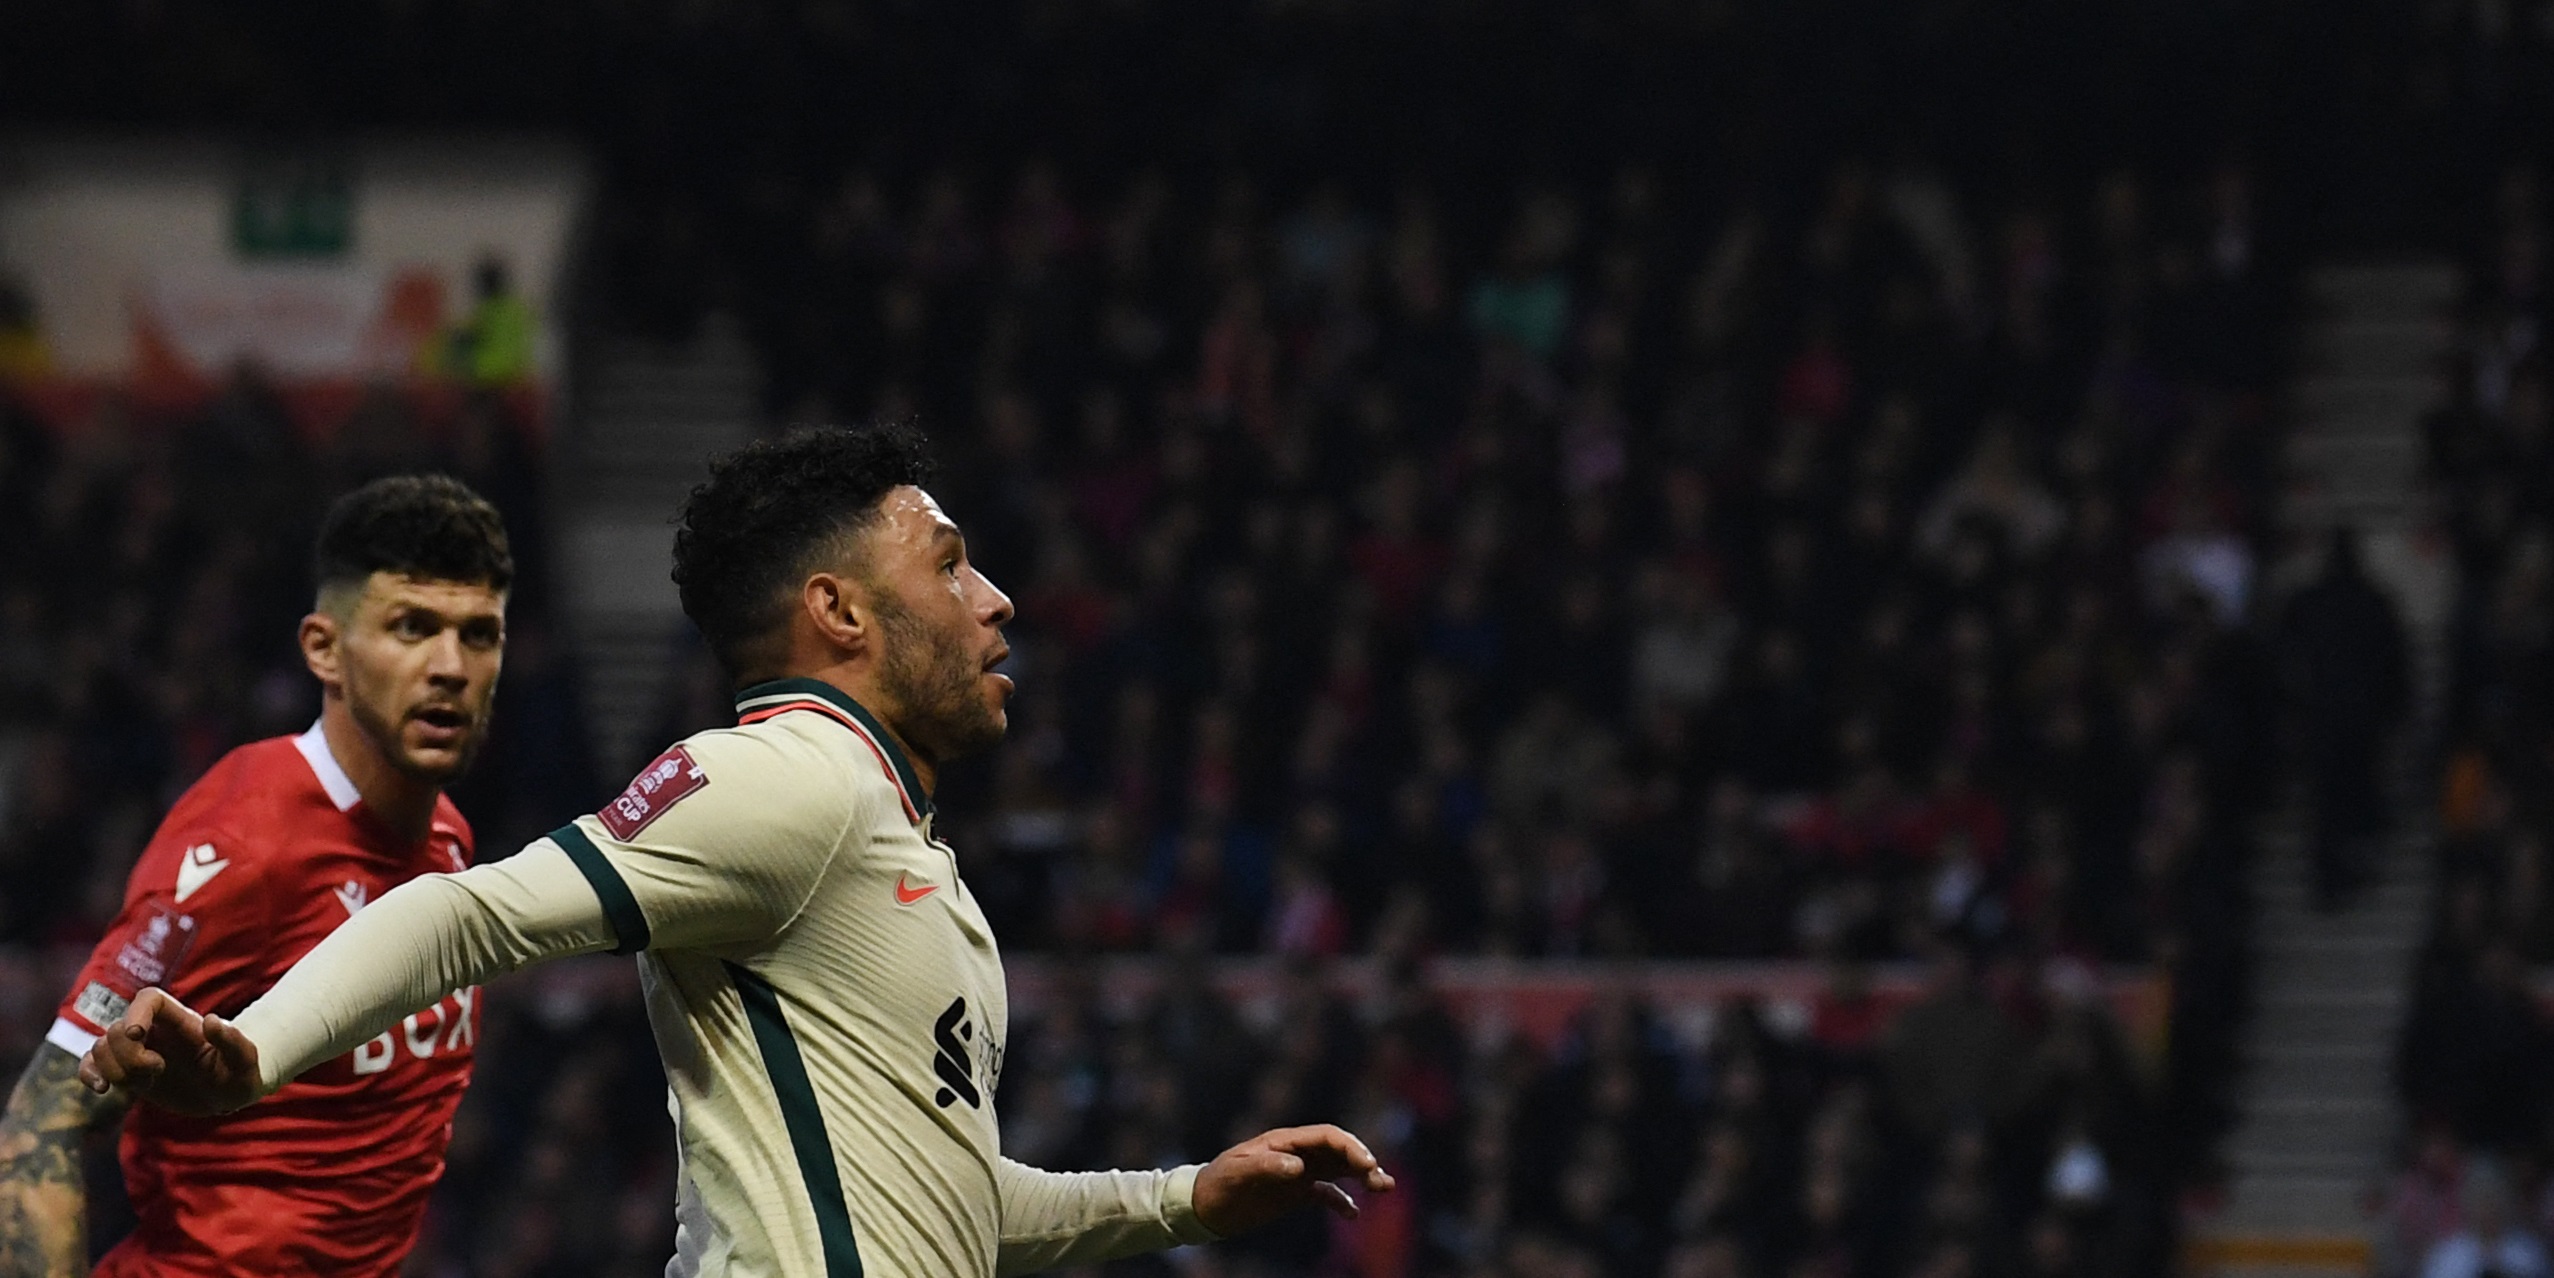 (Images) Oxlade-Chamberlain looks visibly upset after being hooked in second-half of FA Cup win